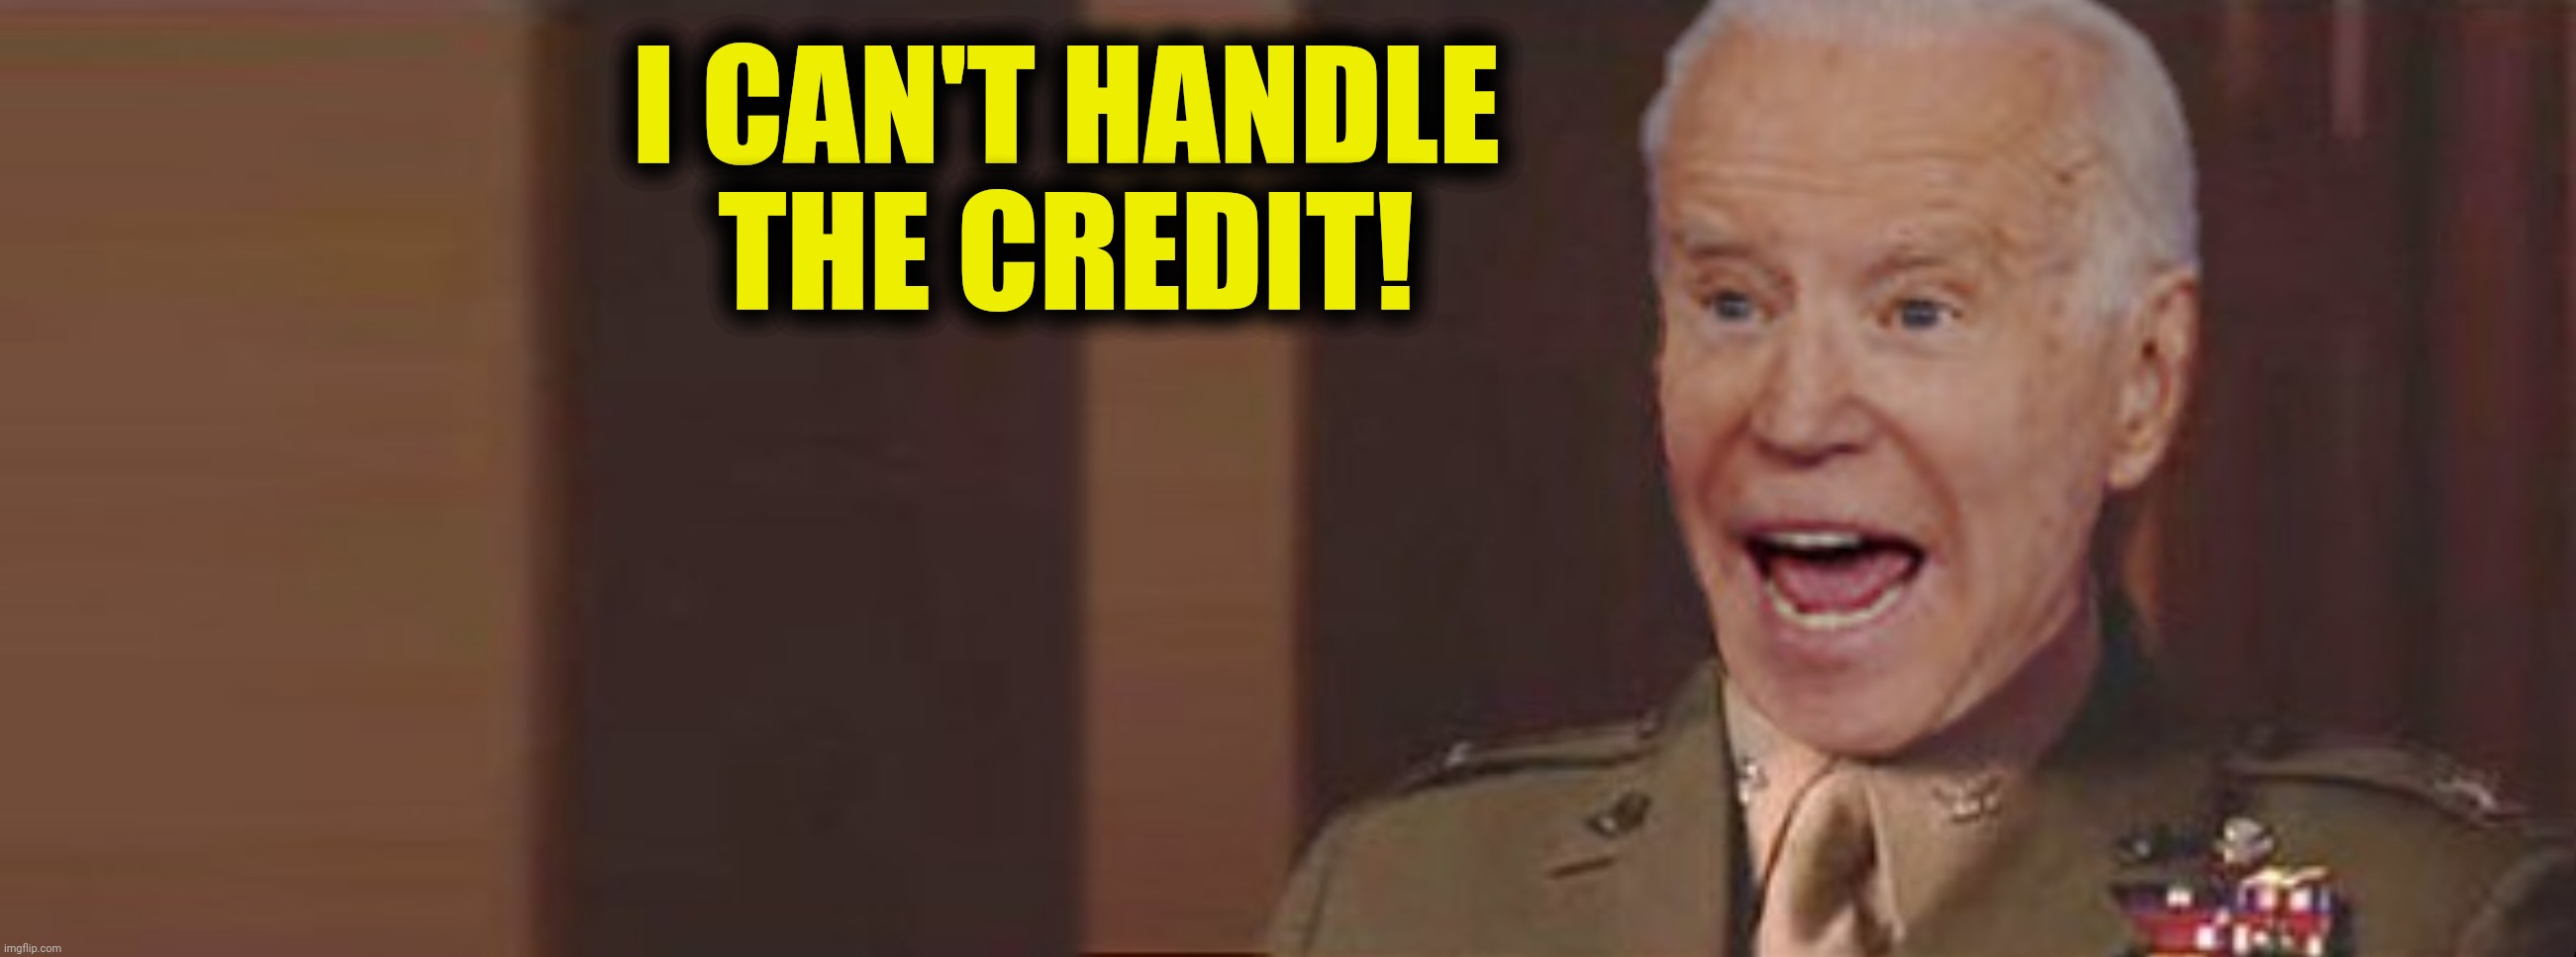 I CAN'T HANDLE THE CREDIT! | made w/ Imgflip meme maker